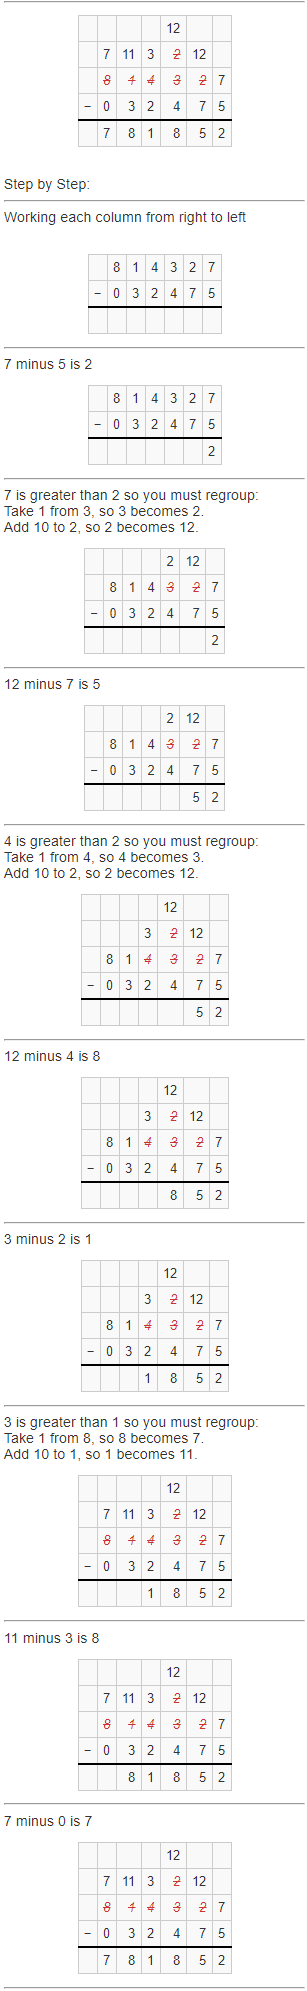 practice and homework lesson 2 2 answer key 4th grade